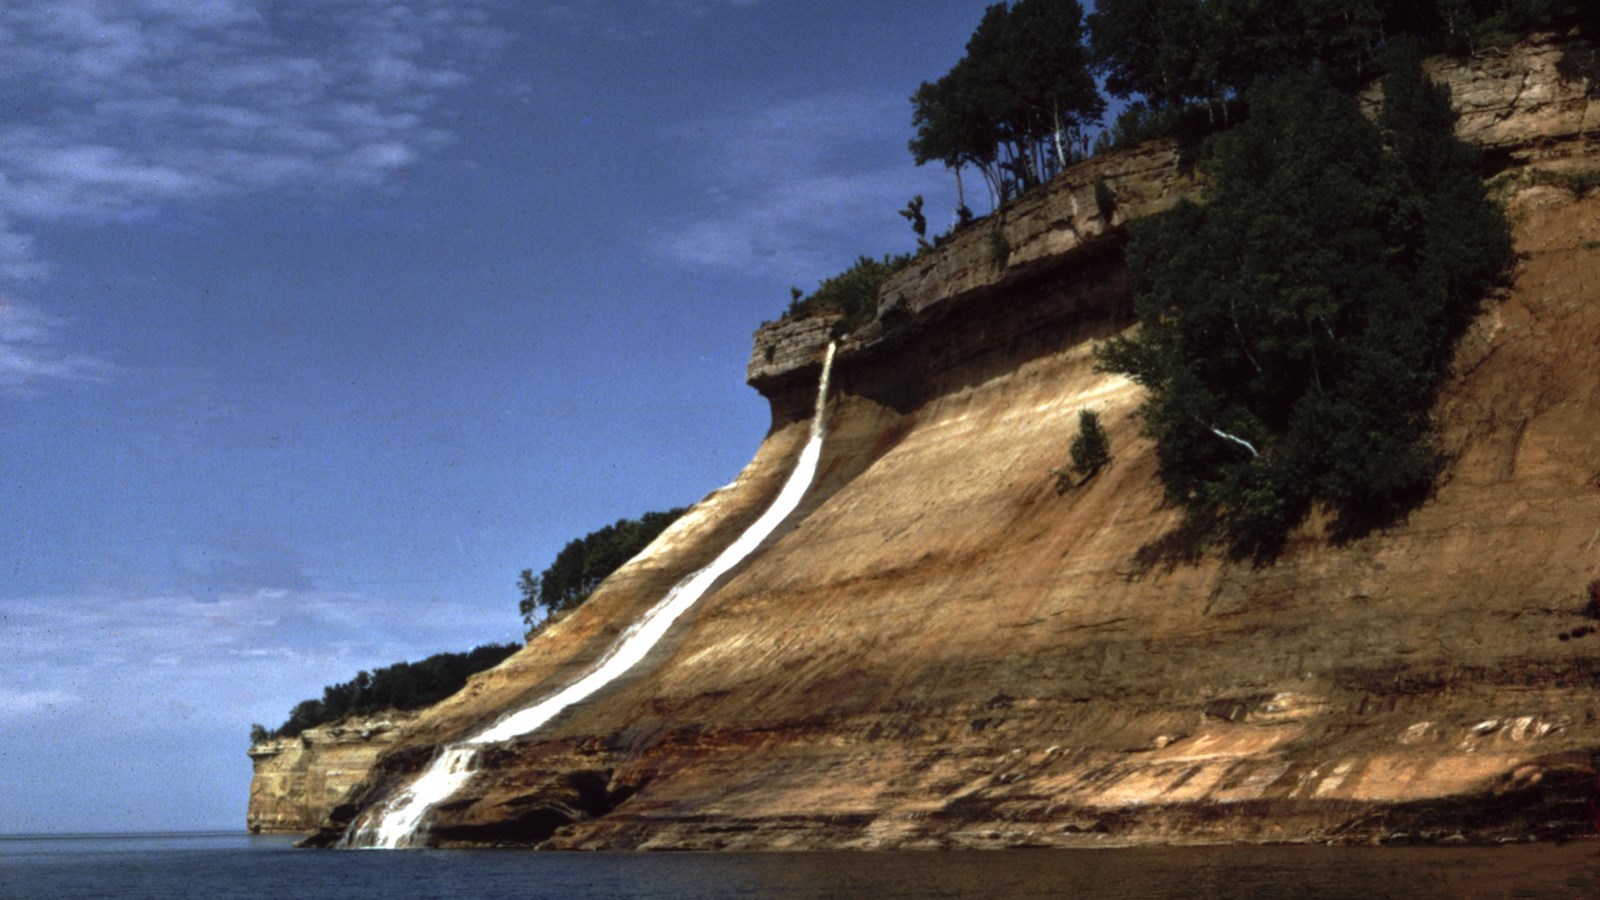 This waterfall flows vertically over a hard rock cap onto softer sandstone rock that slopes at a 4